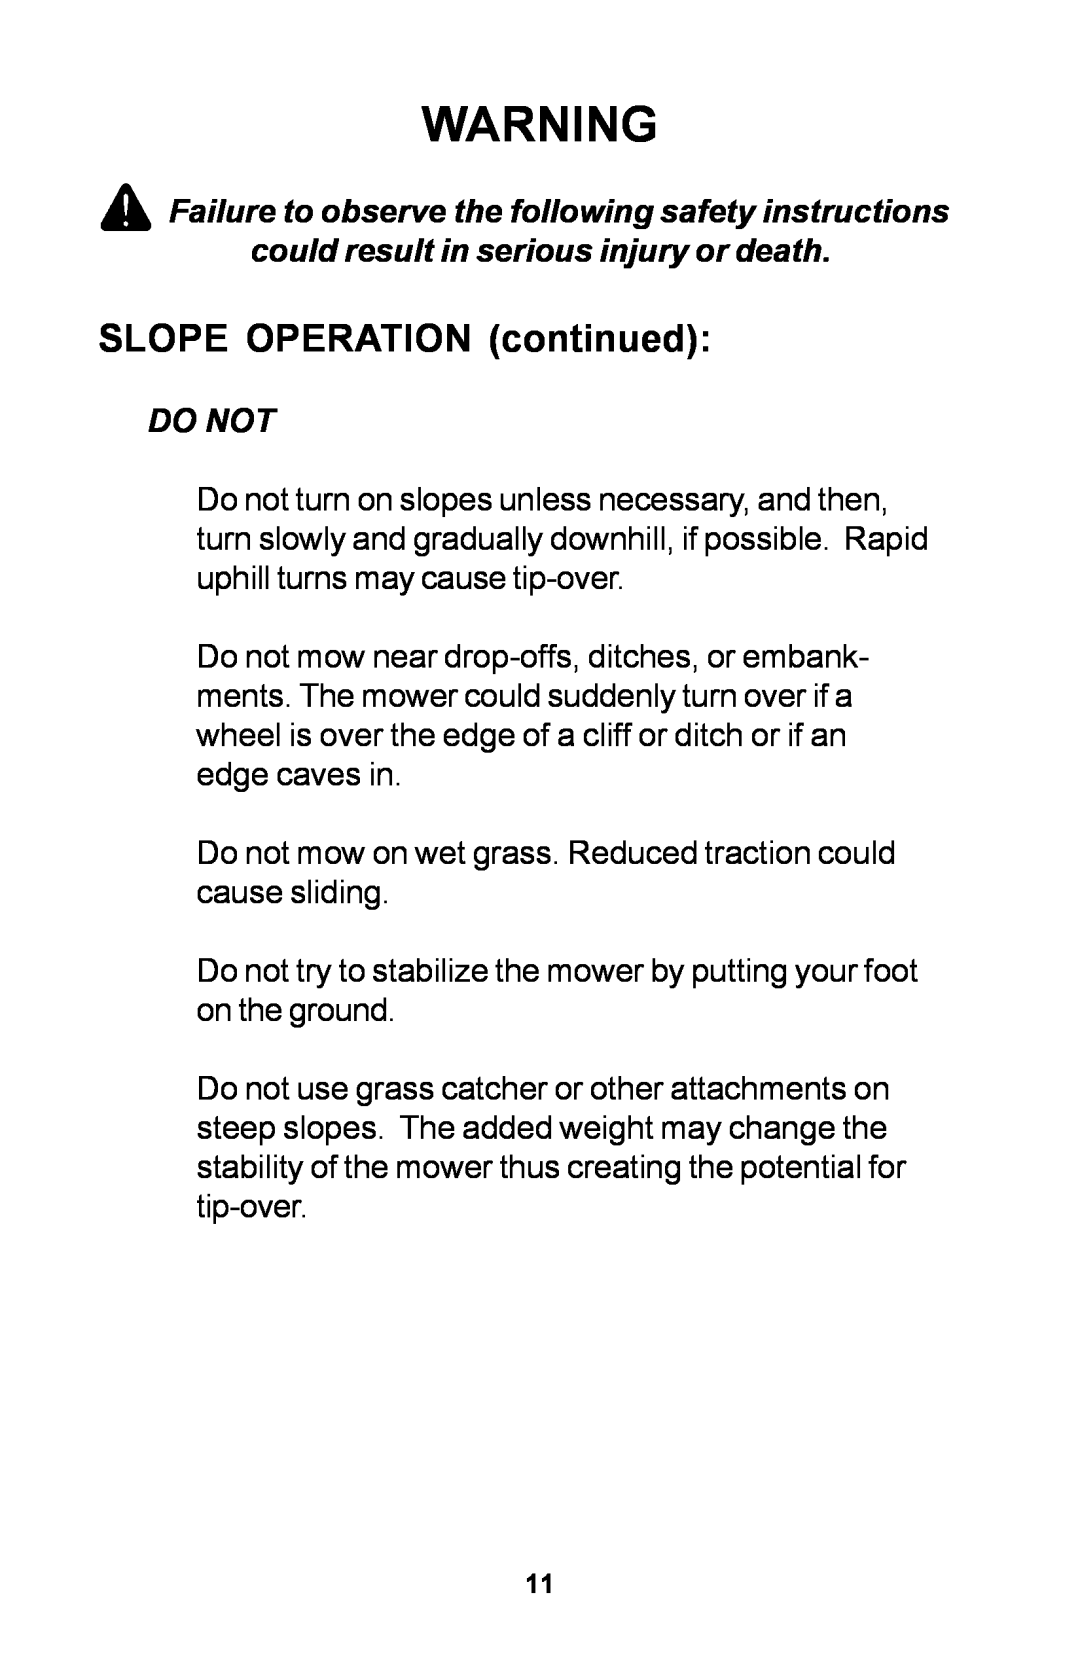 Dixon 30 manual SLOPE OPERATION continued, Do Not 